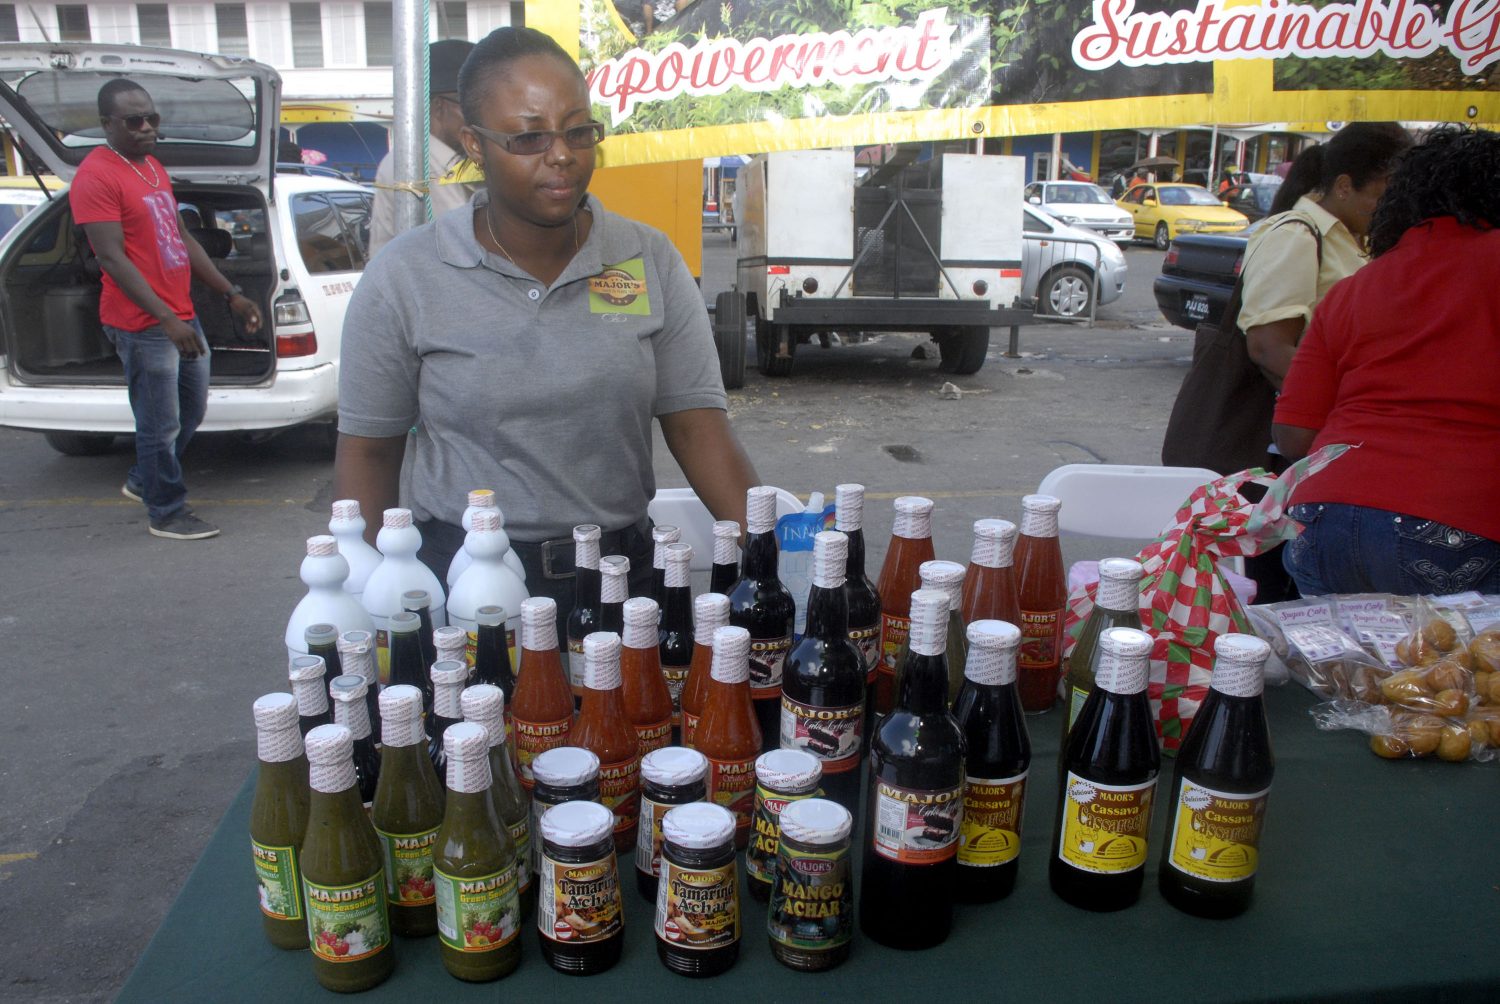 At the GMC’s Stabroek Square Street Fair: A Major’s Food Products display.